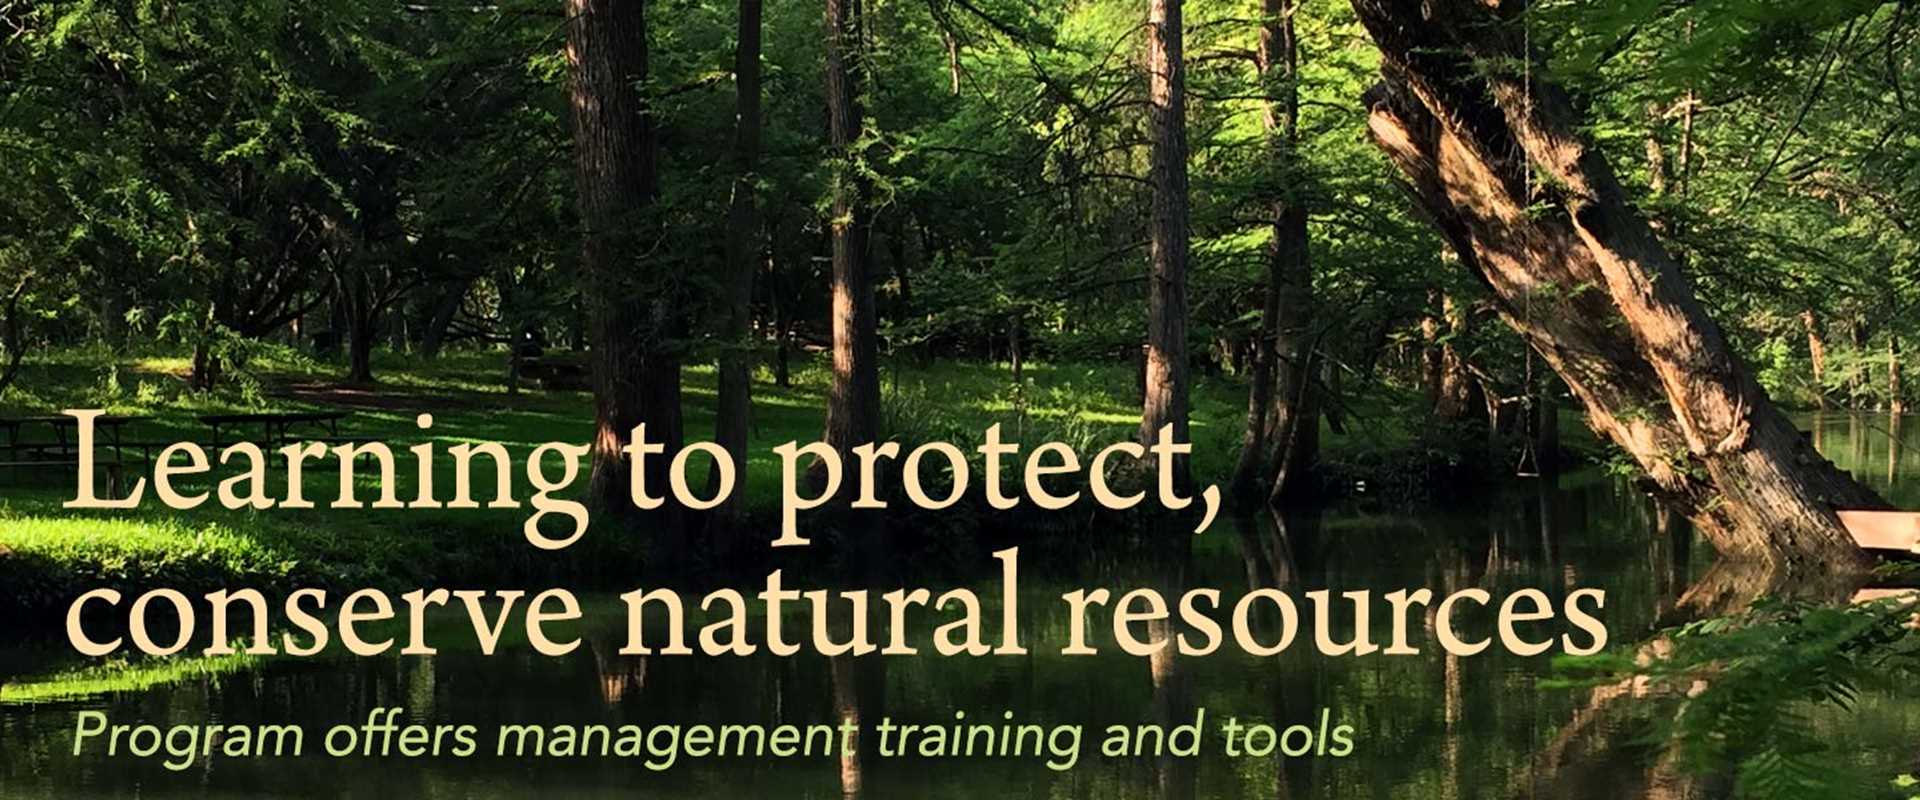 Learning to protect, conserve natural resources